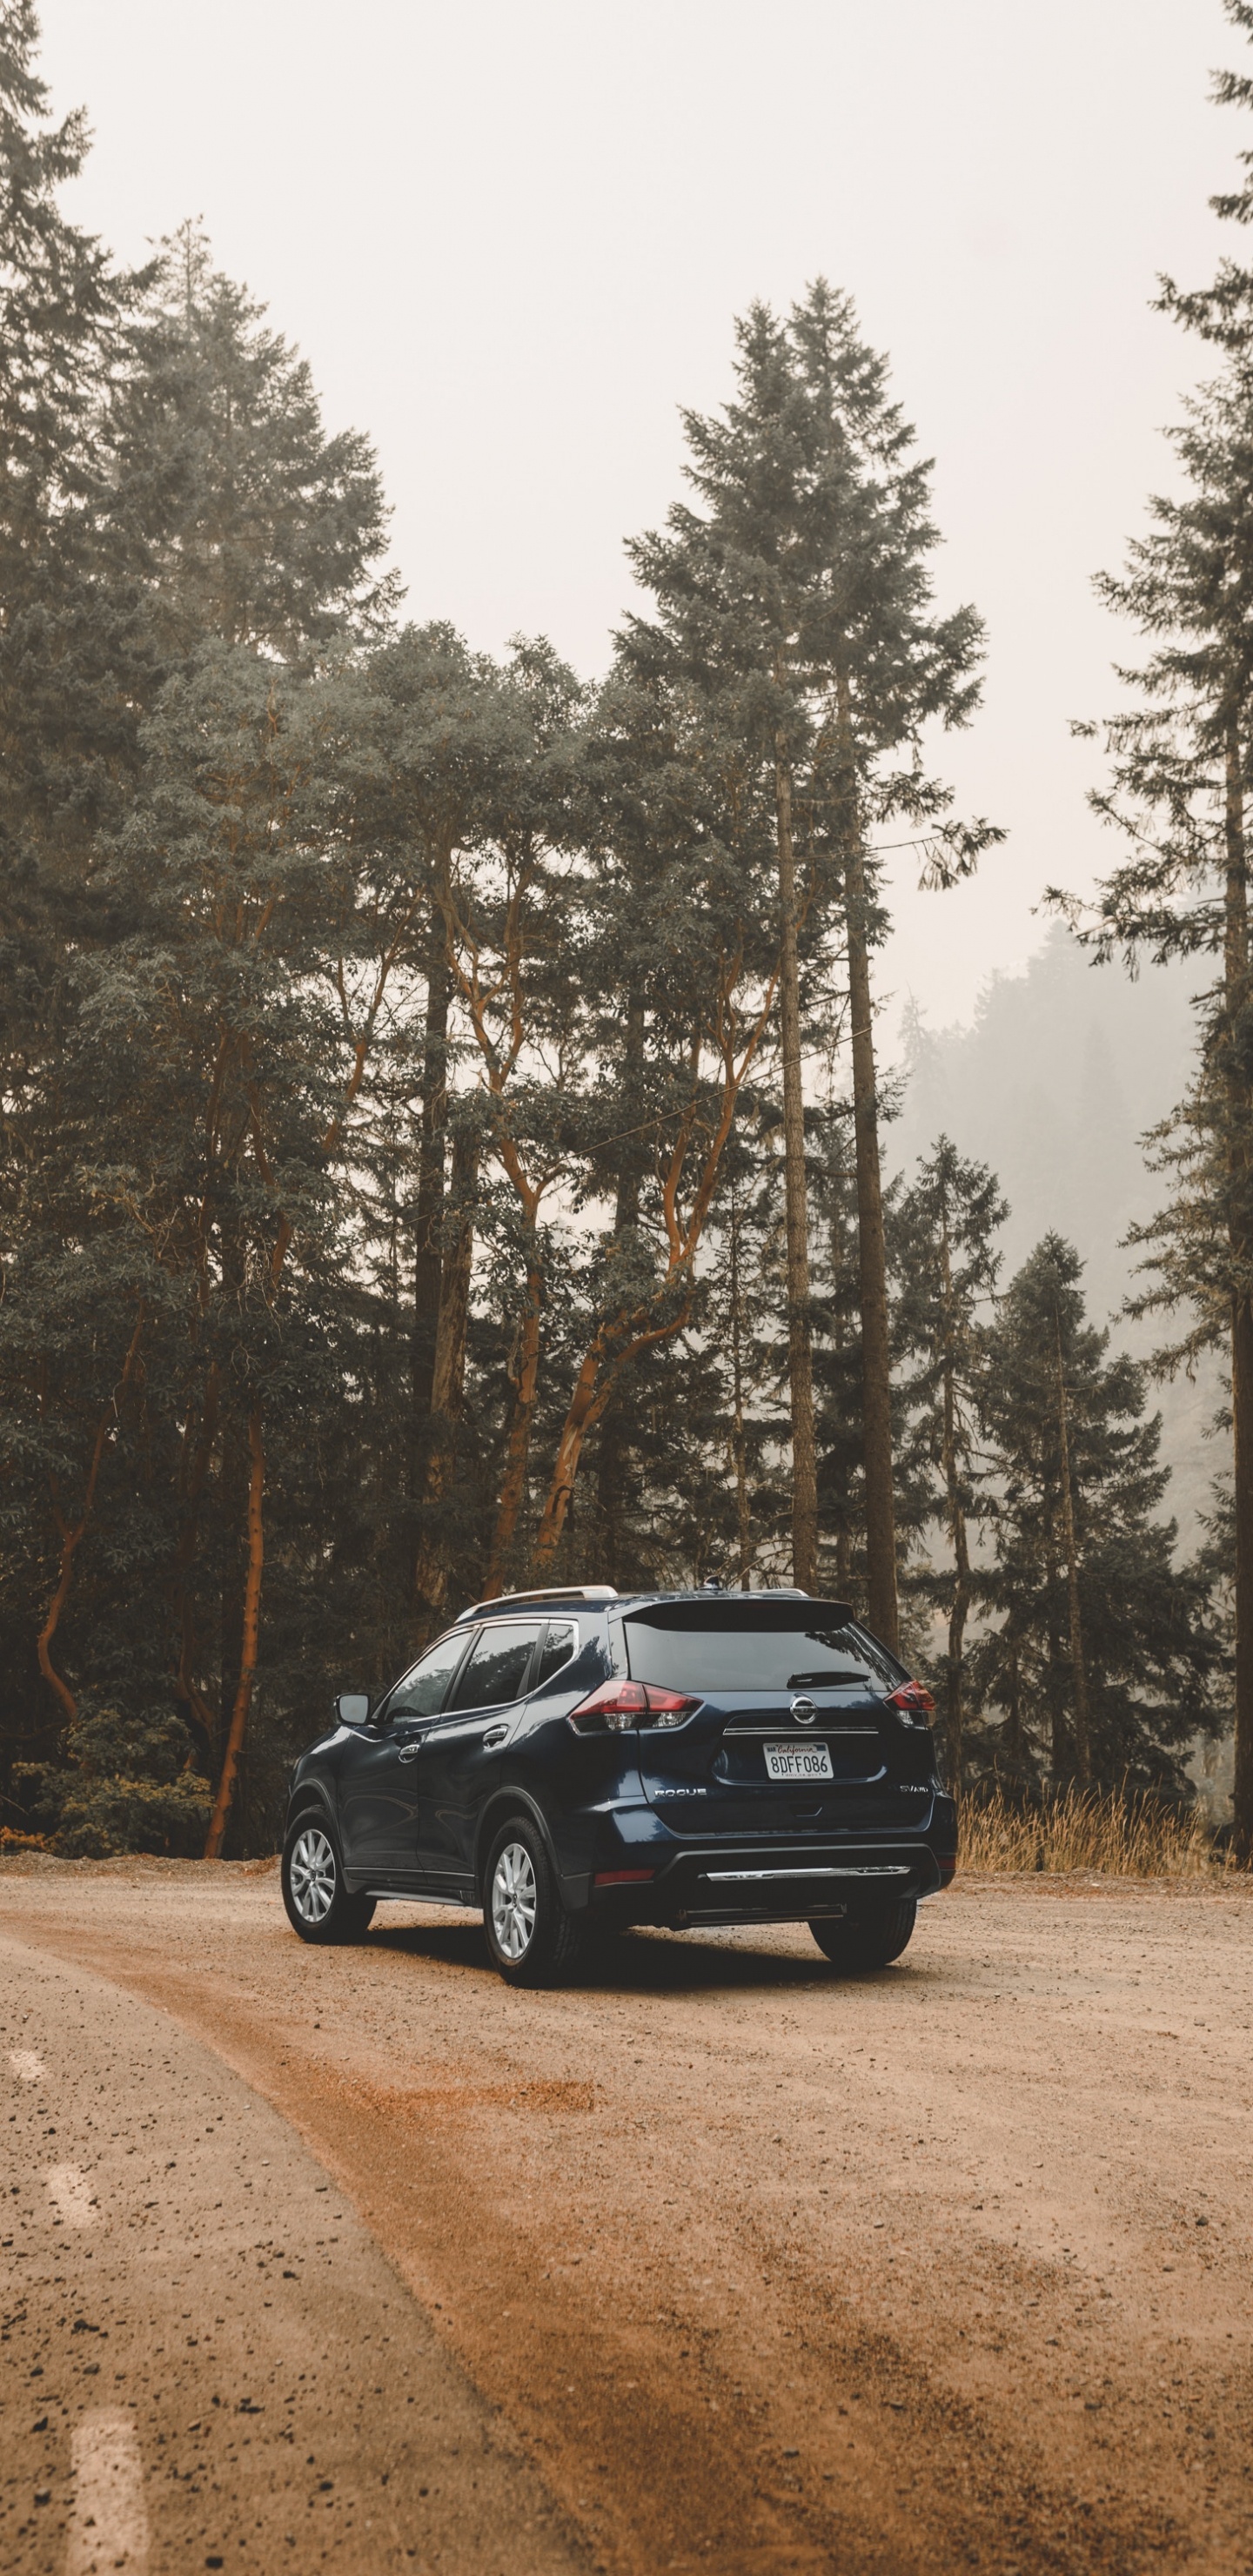 Black Car on Dirt Road Near Trees During Daytime. Wallpaper in 1440x2960 Resolution